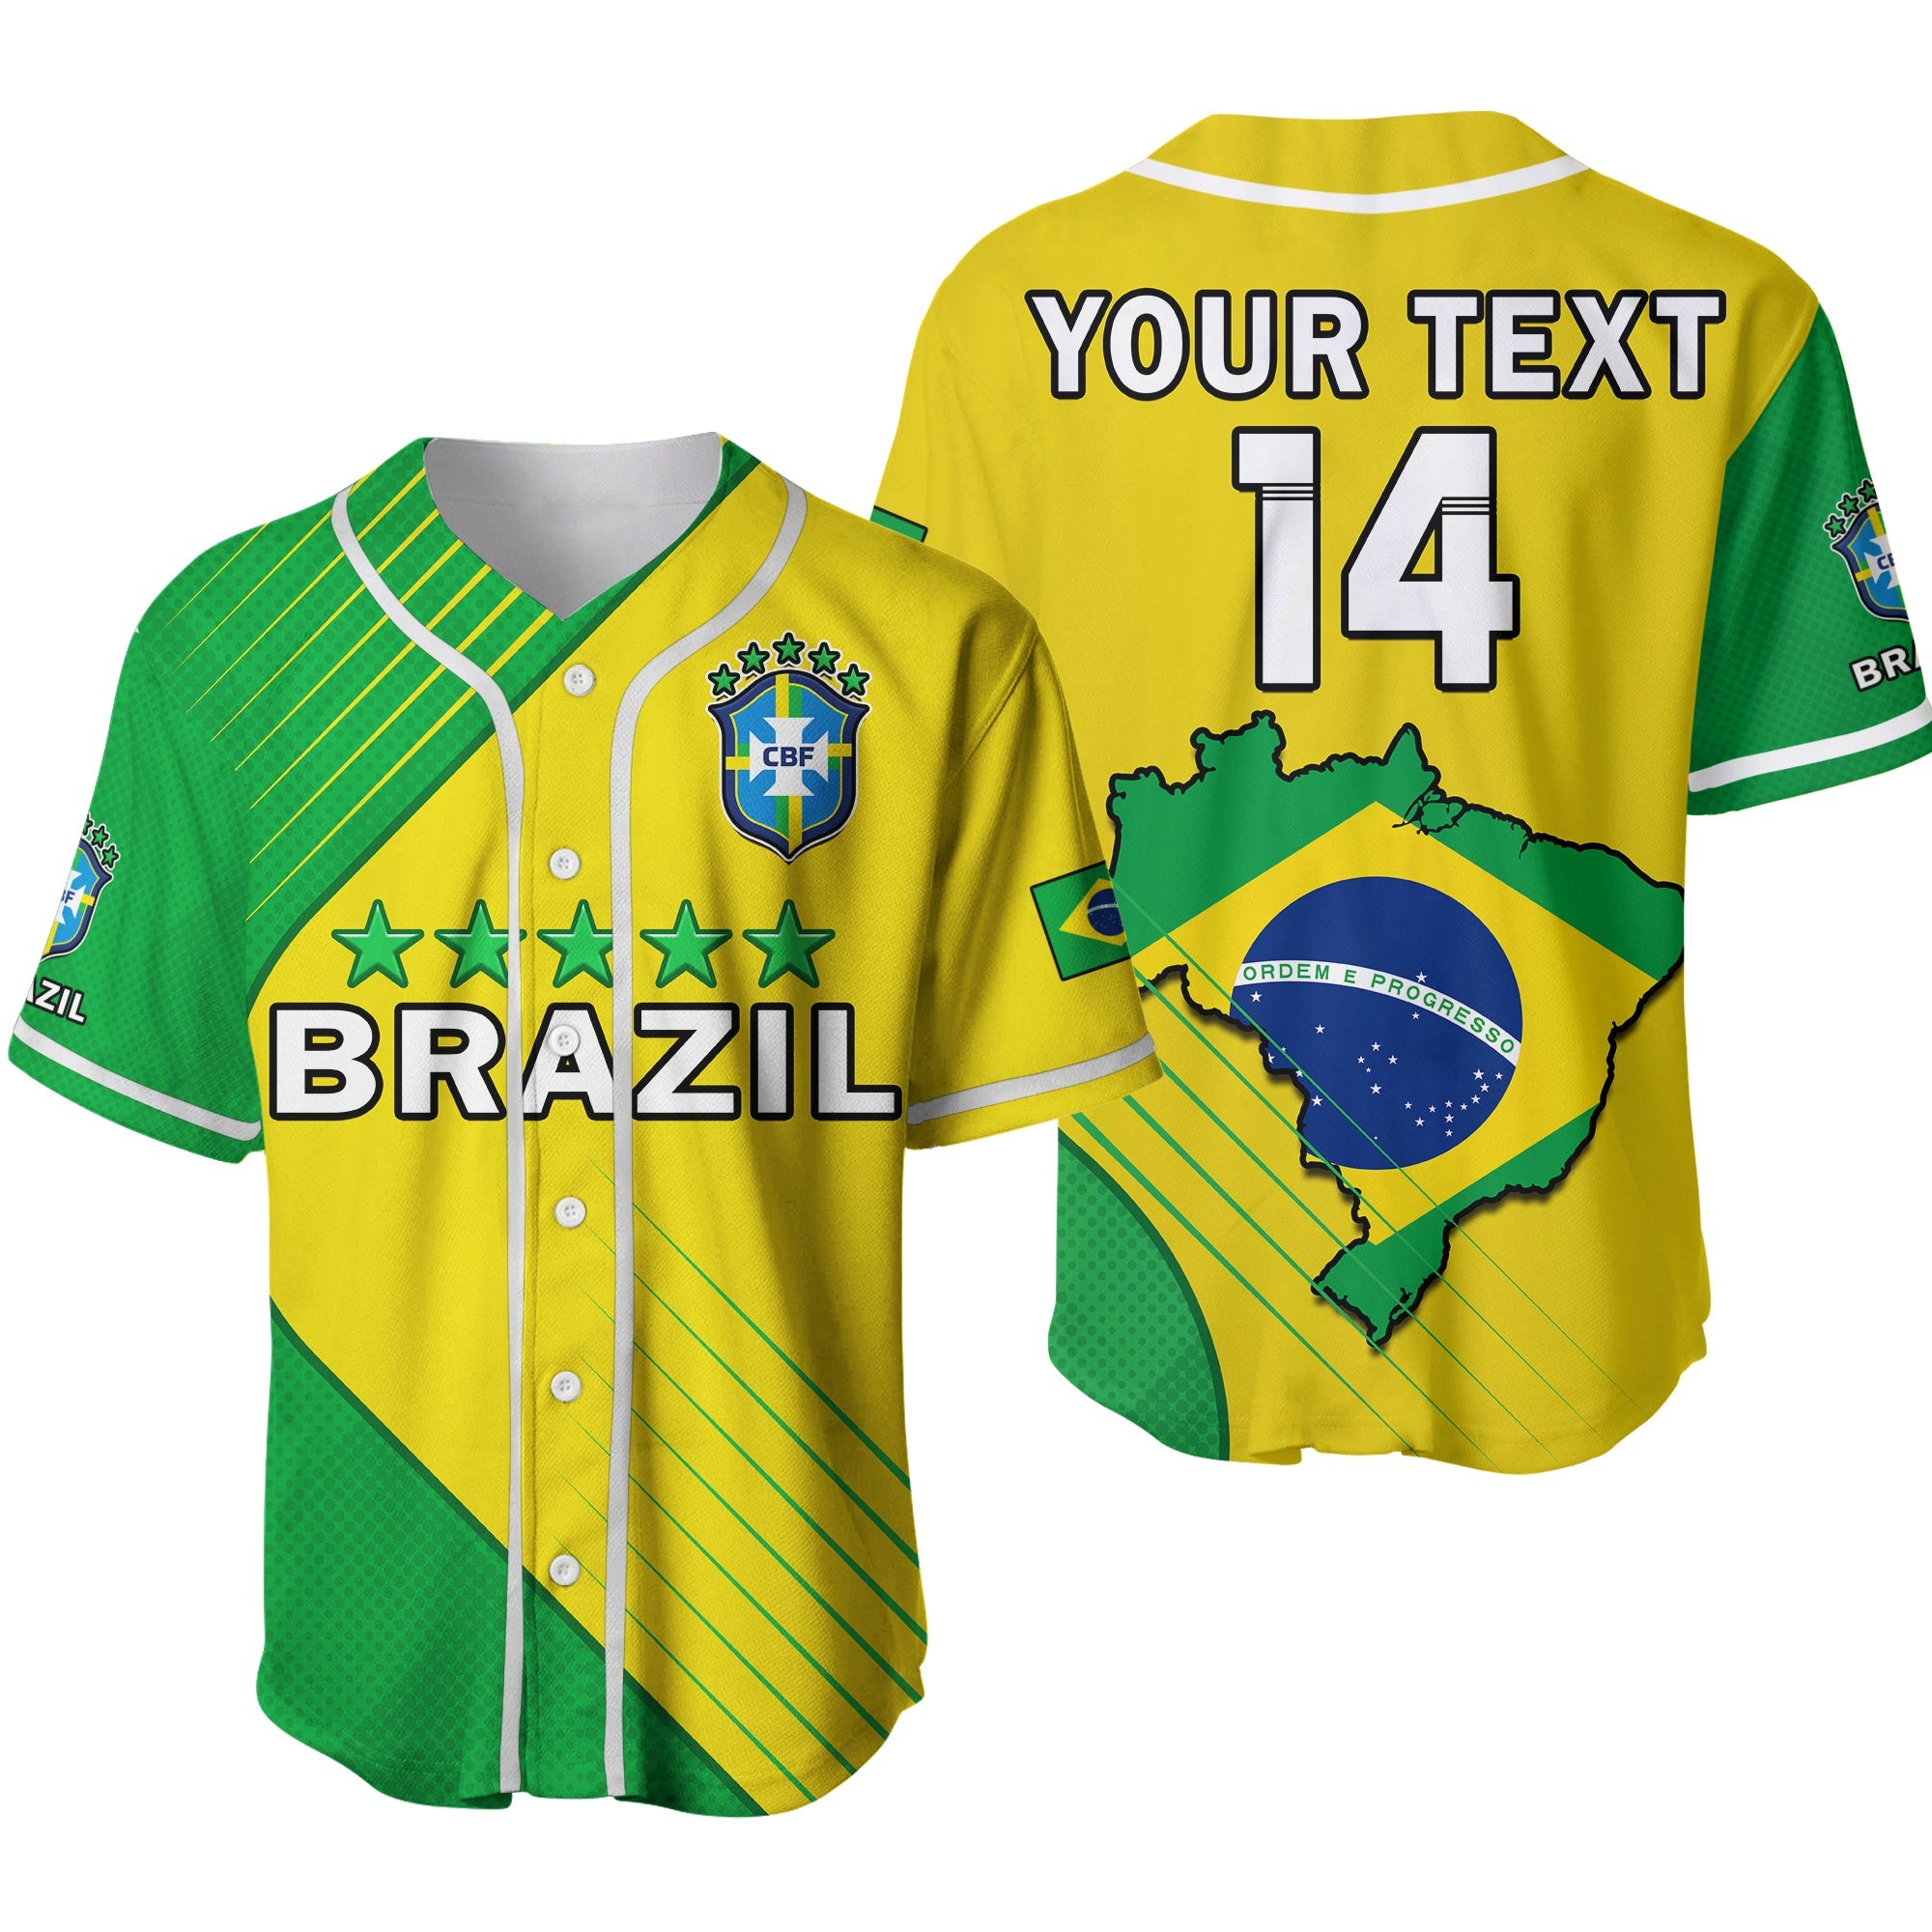 custom-text-and-number-brazil-football-baseball-jersey-brasil-map-come-on-canarinho-sporty-style-ver02